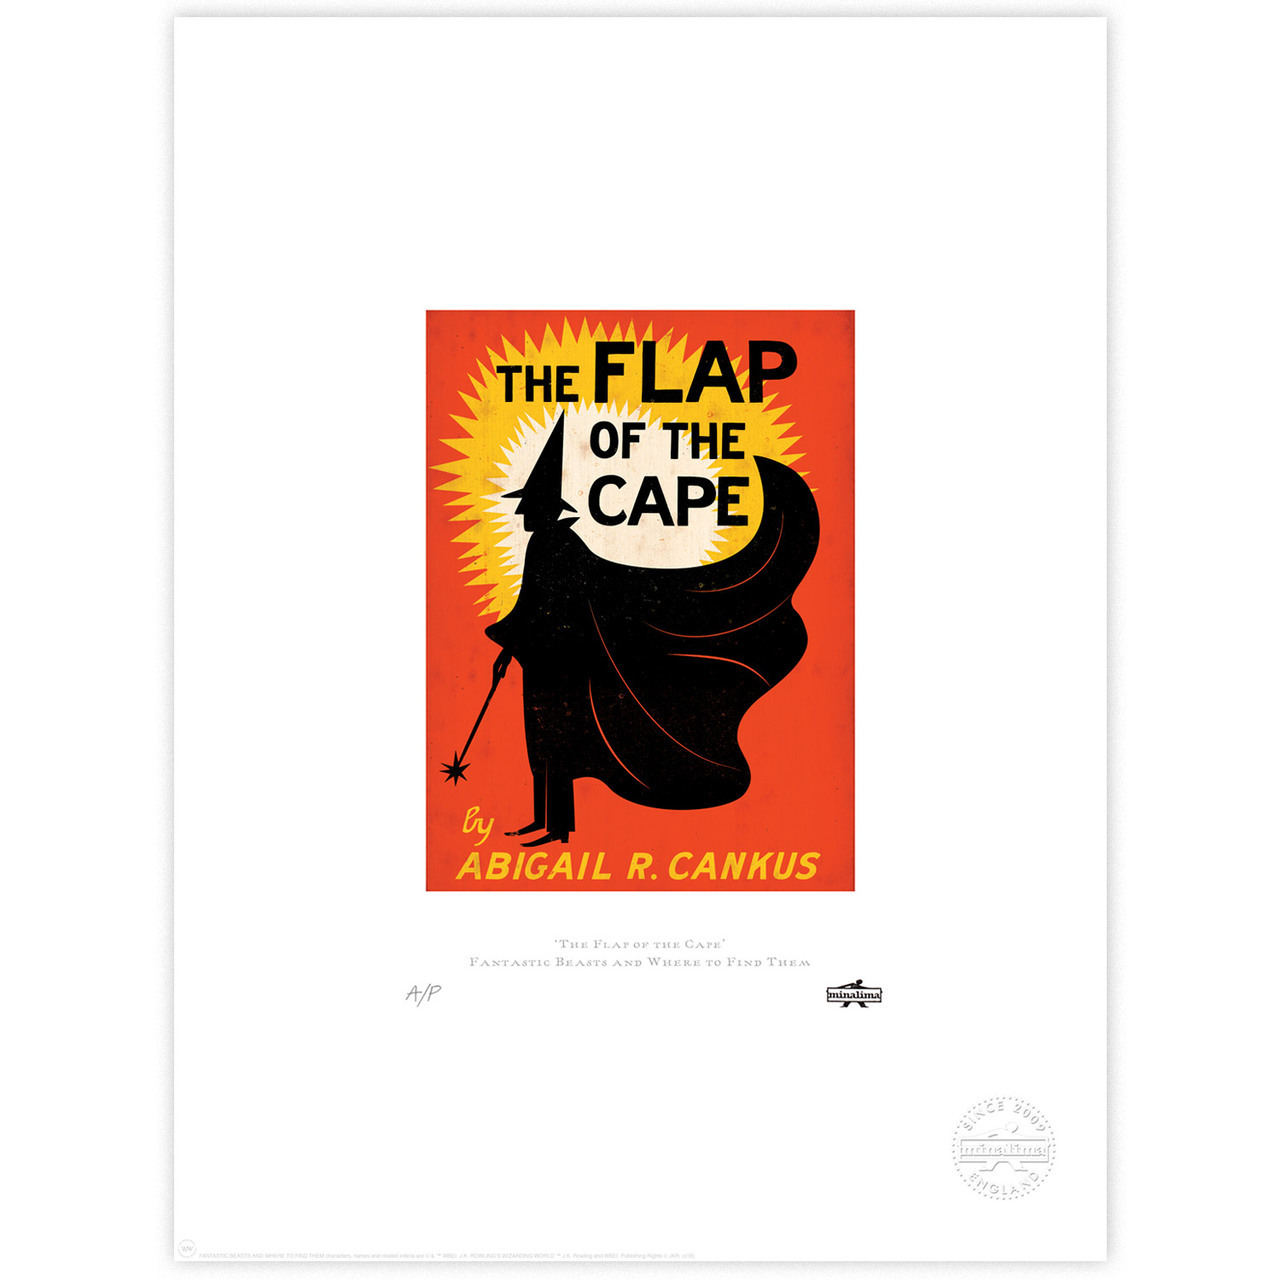 The Flap of the Cape